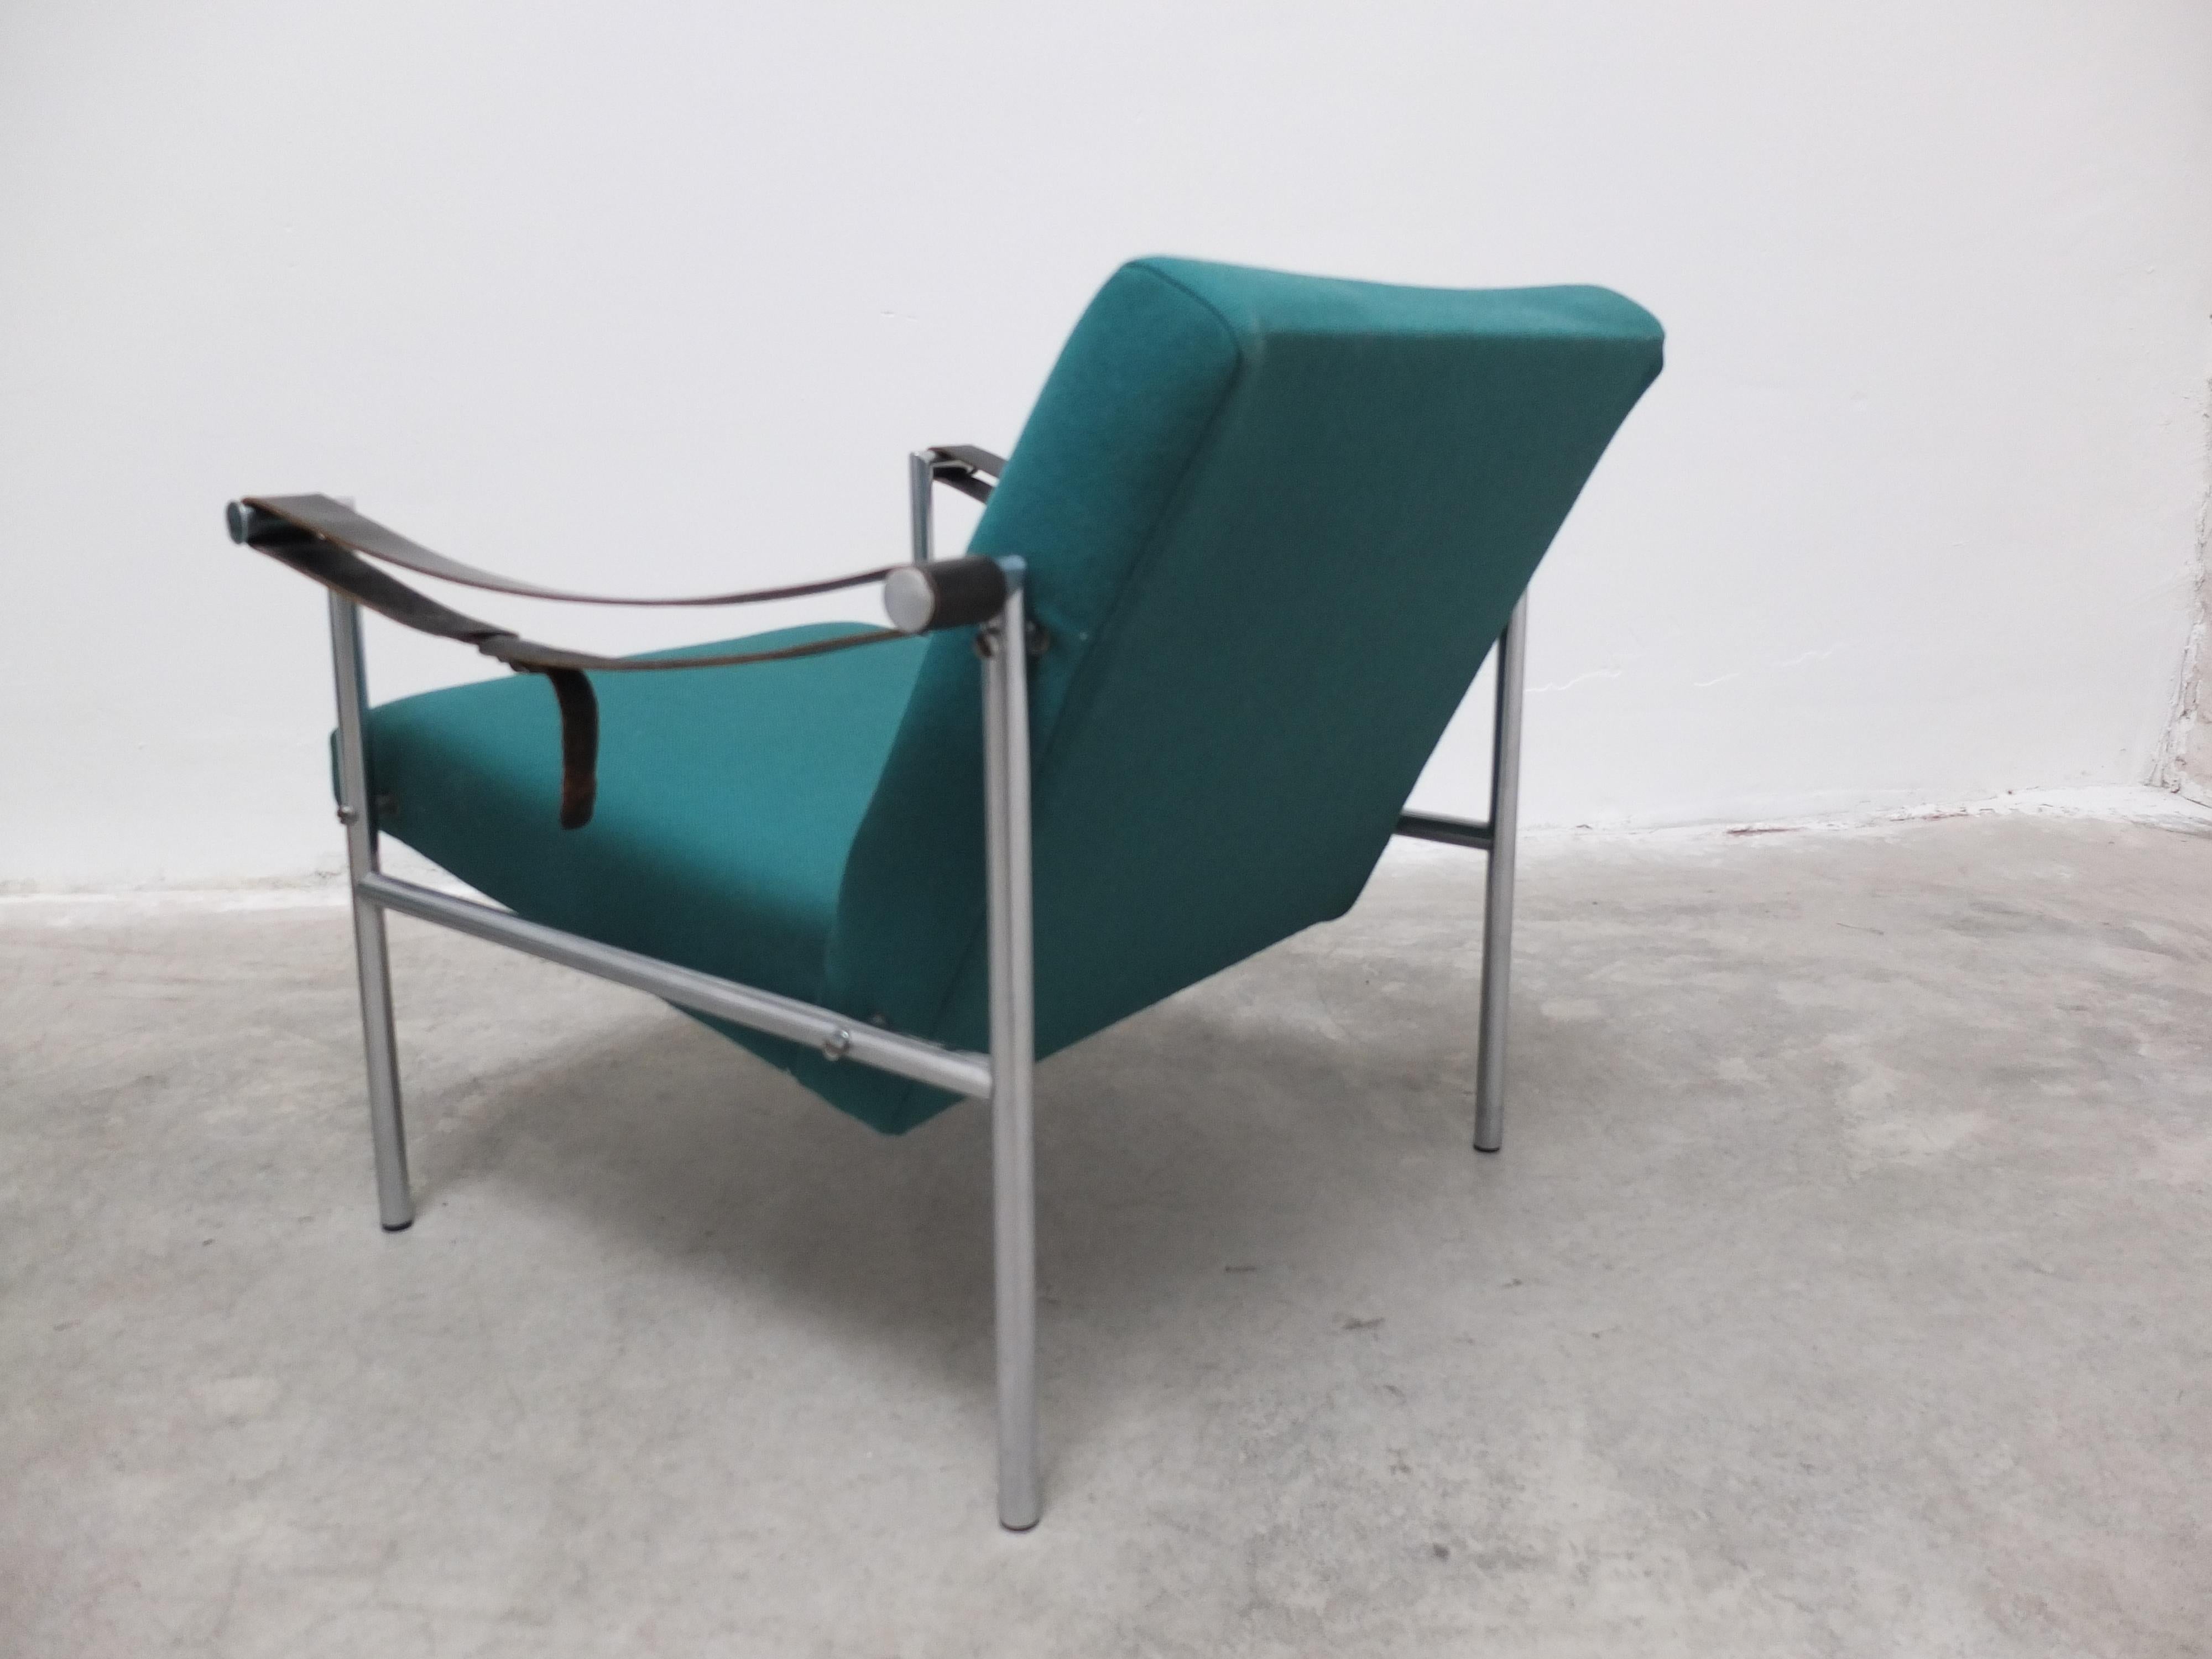 Pair of 'SZ08' Lounge Chairs by Martin Visser for 't Spectrum, 1960 For Sale 9